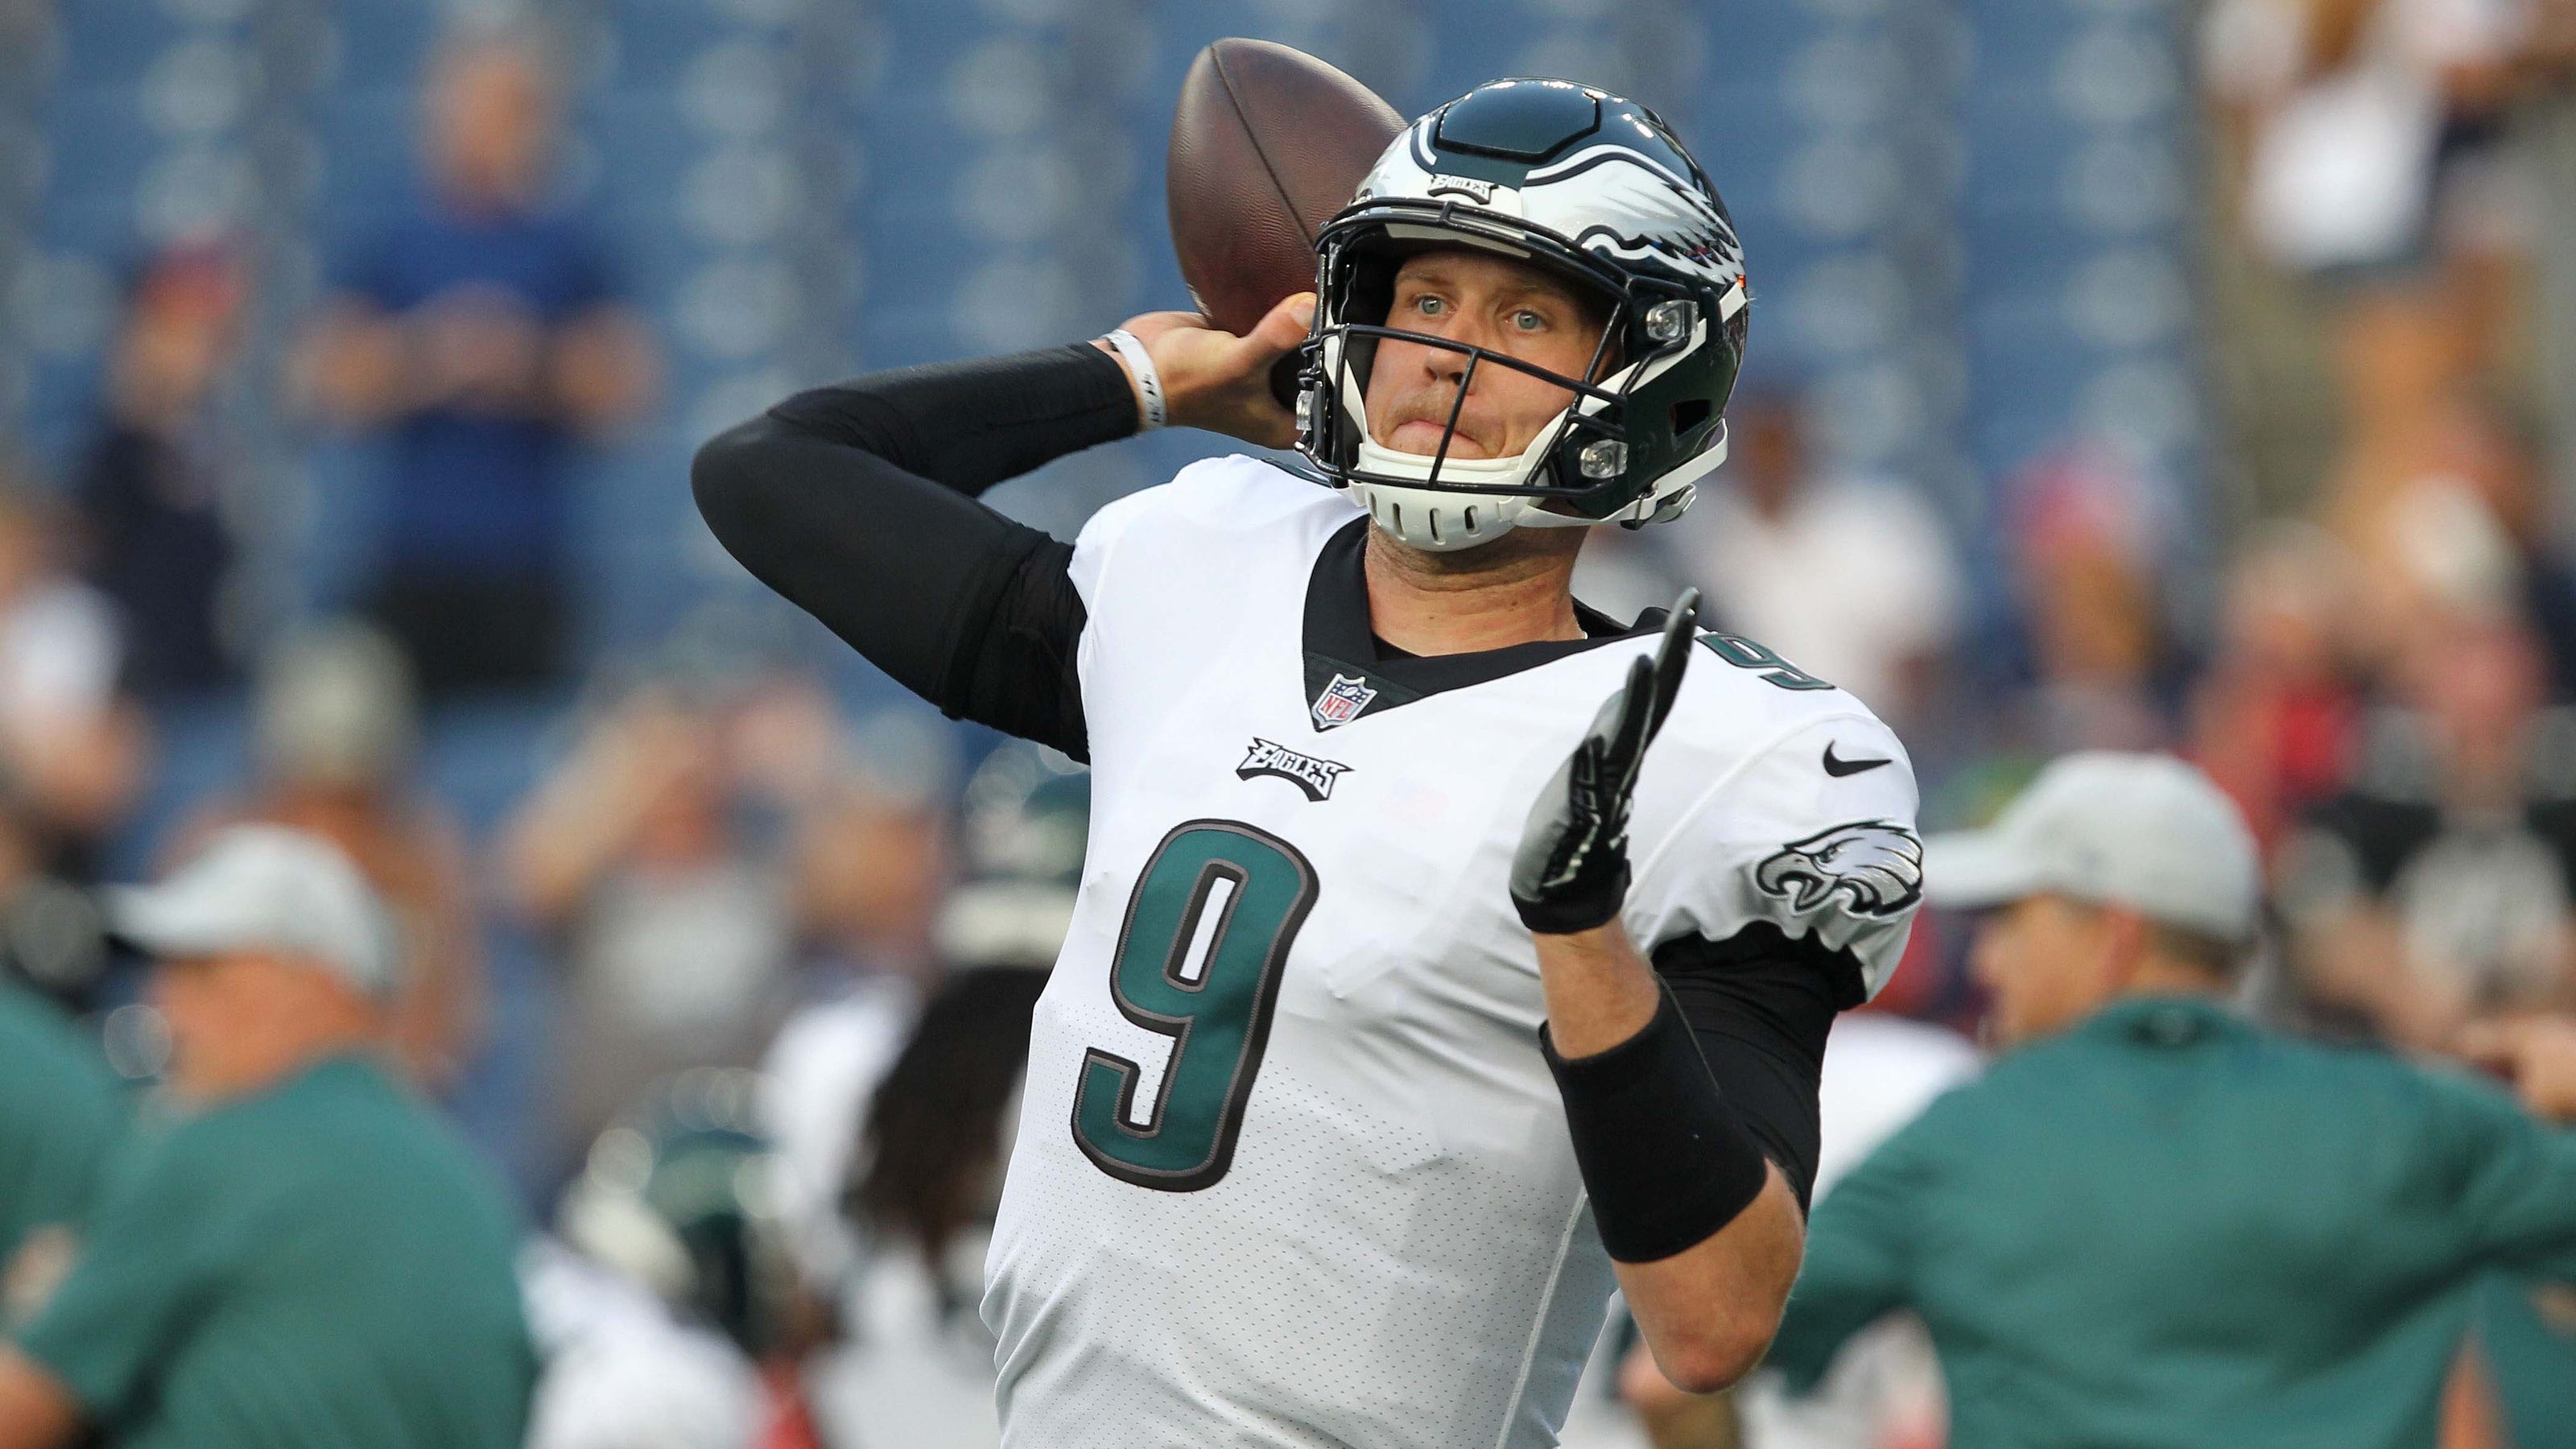 Eagles Nick Foles to start at QB in Week 1 vs. Falcons